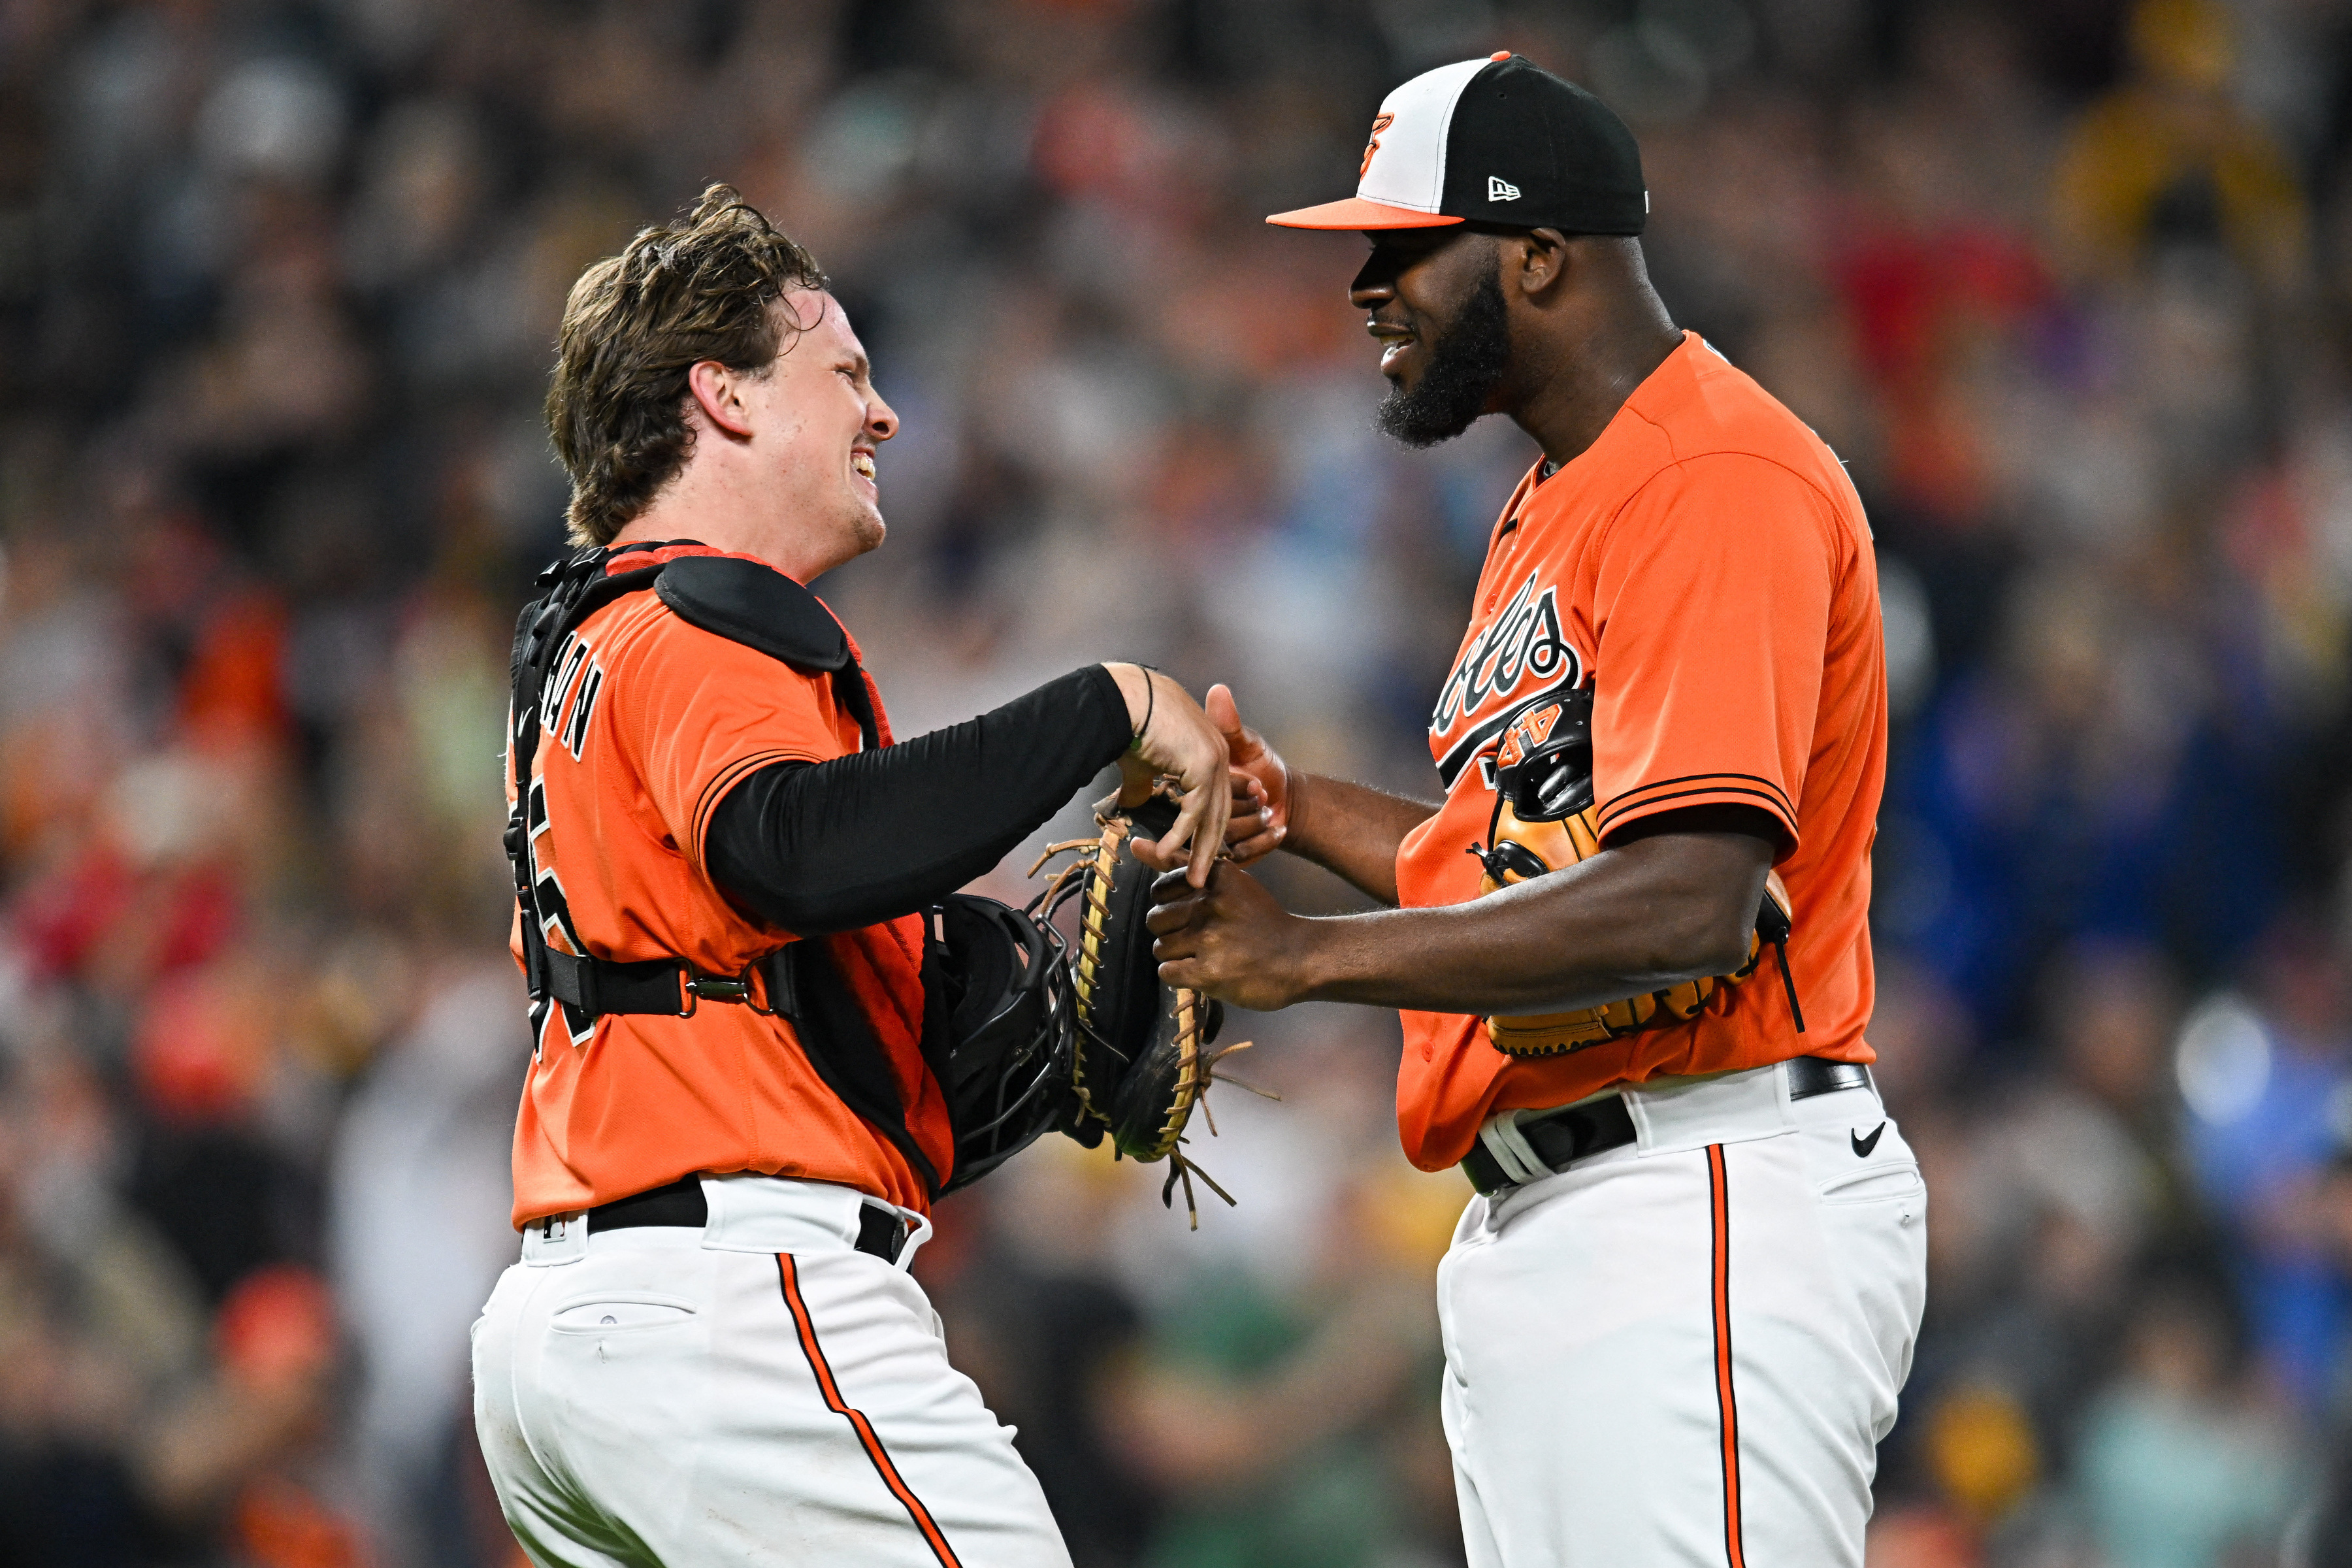 Orioles blank Pirates, win 4th straight behind Tyler Wells